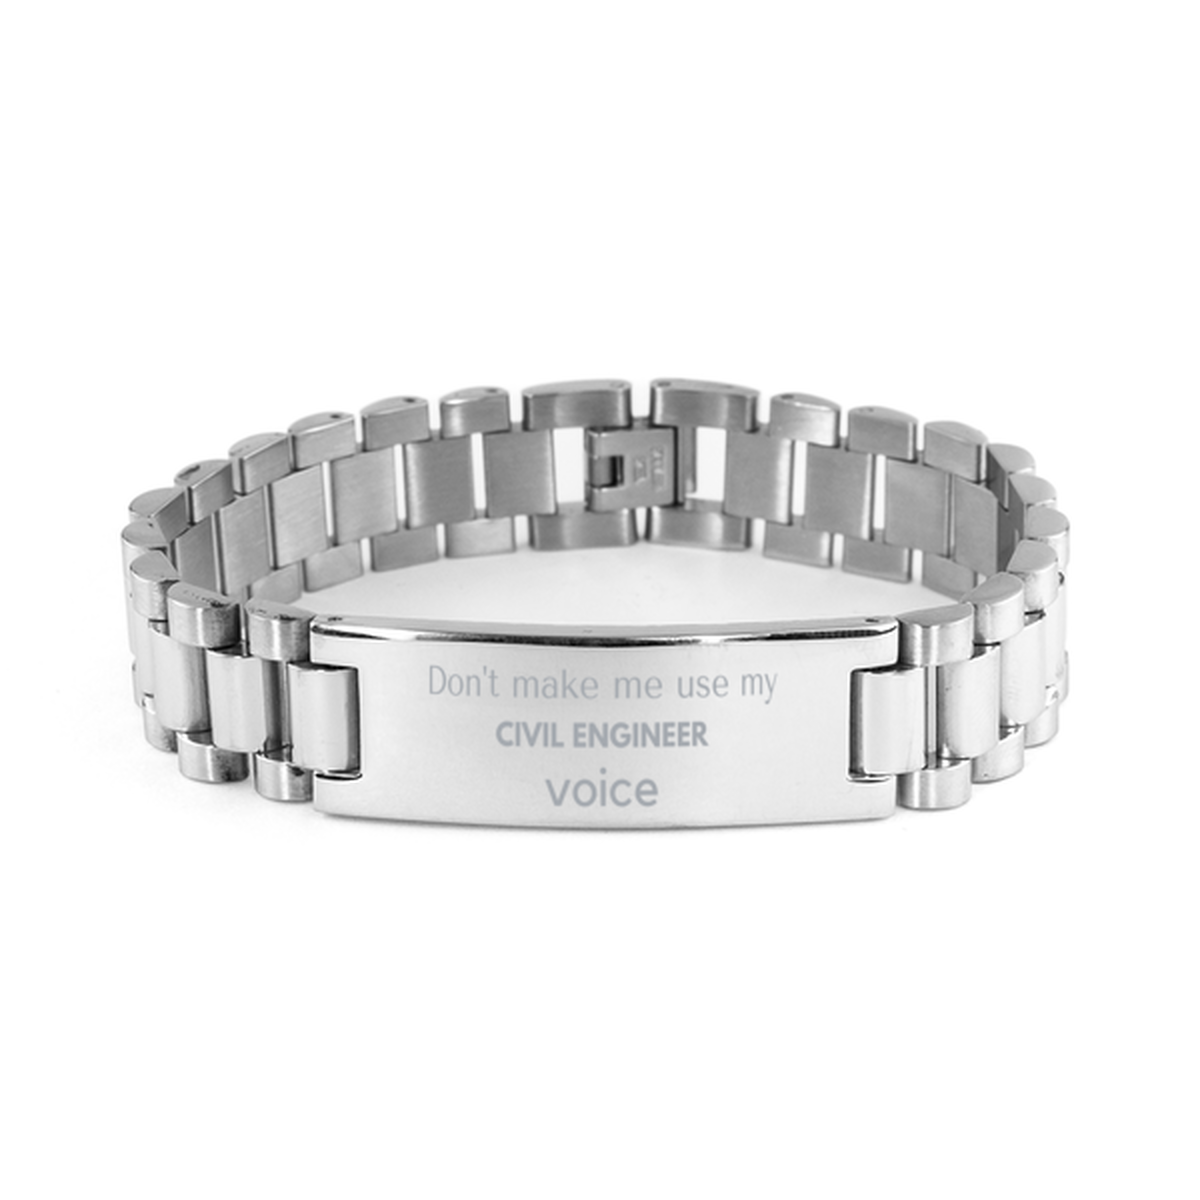 Don't make me use my Civil Engineer voice, Sarcasm Civil Engineer Gifts, Christmas Civil Engineer Ladder Stainless Steel Bracelet Birthday Unique Gifts For Civil Engineer Coworkers, Men, Women, Colleague, Friends